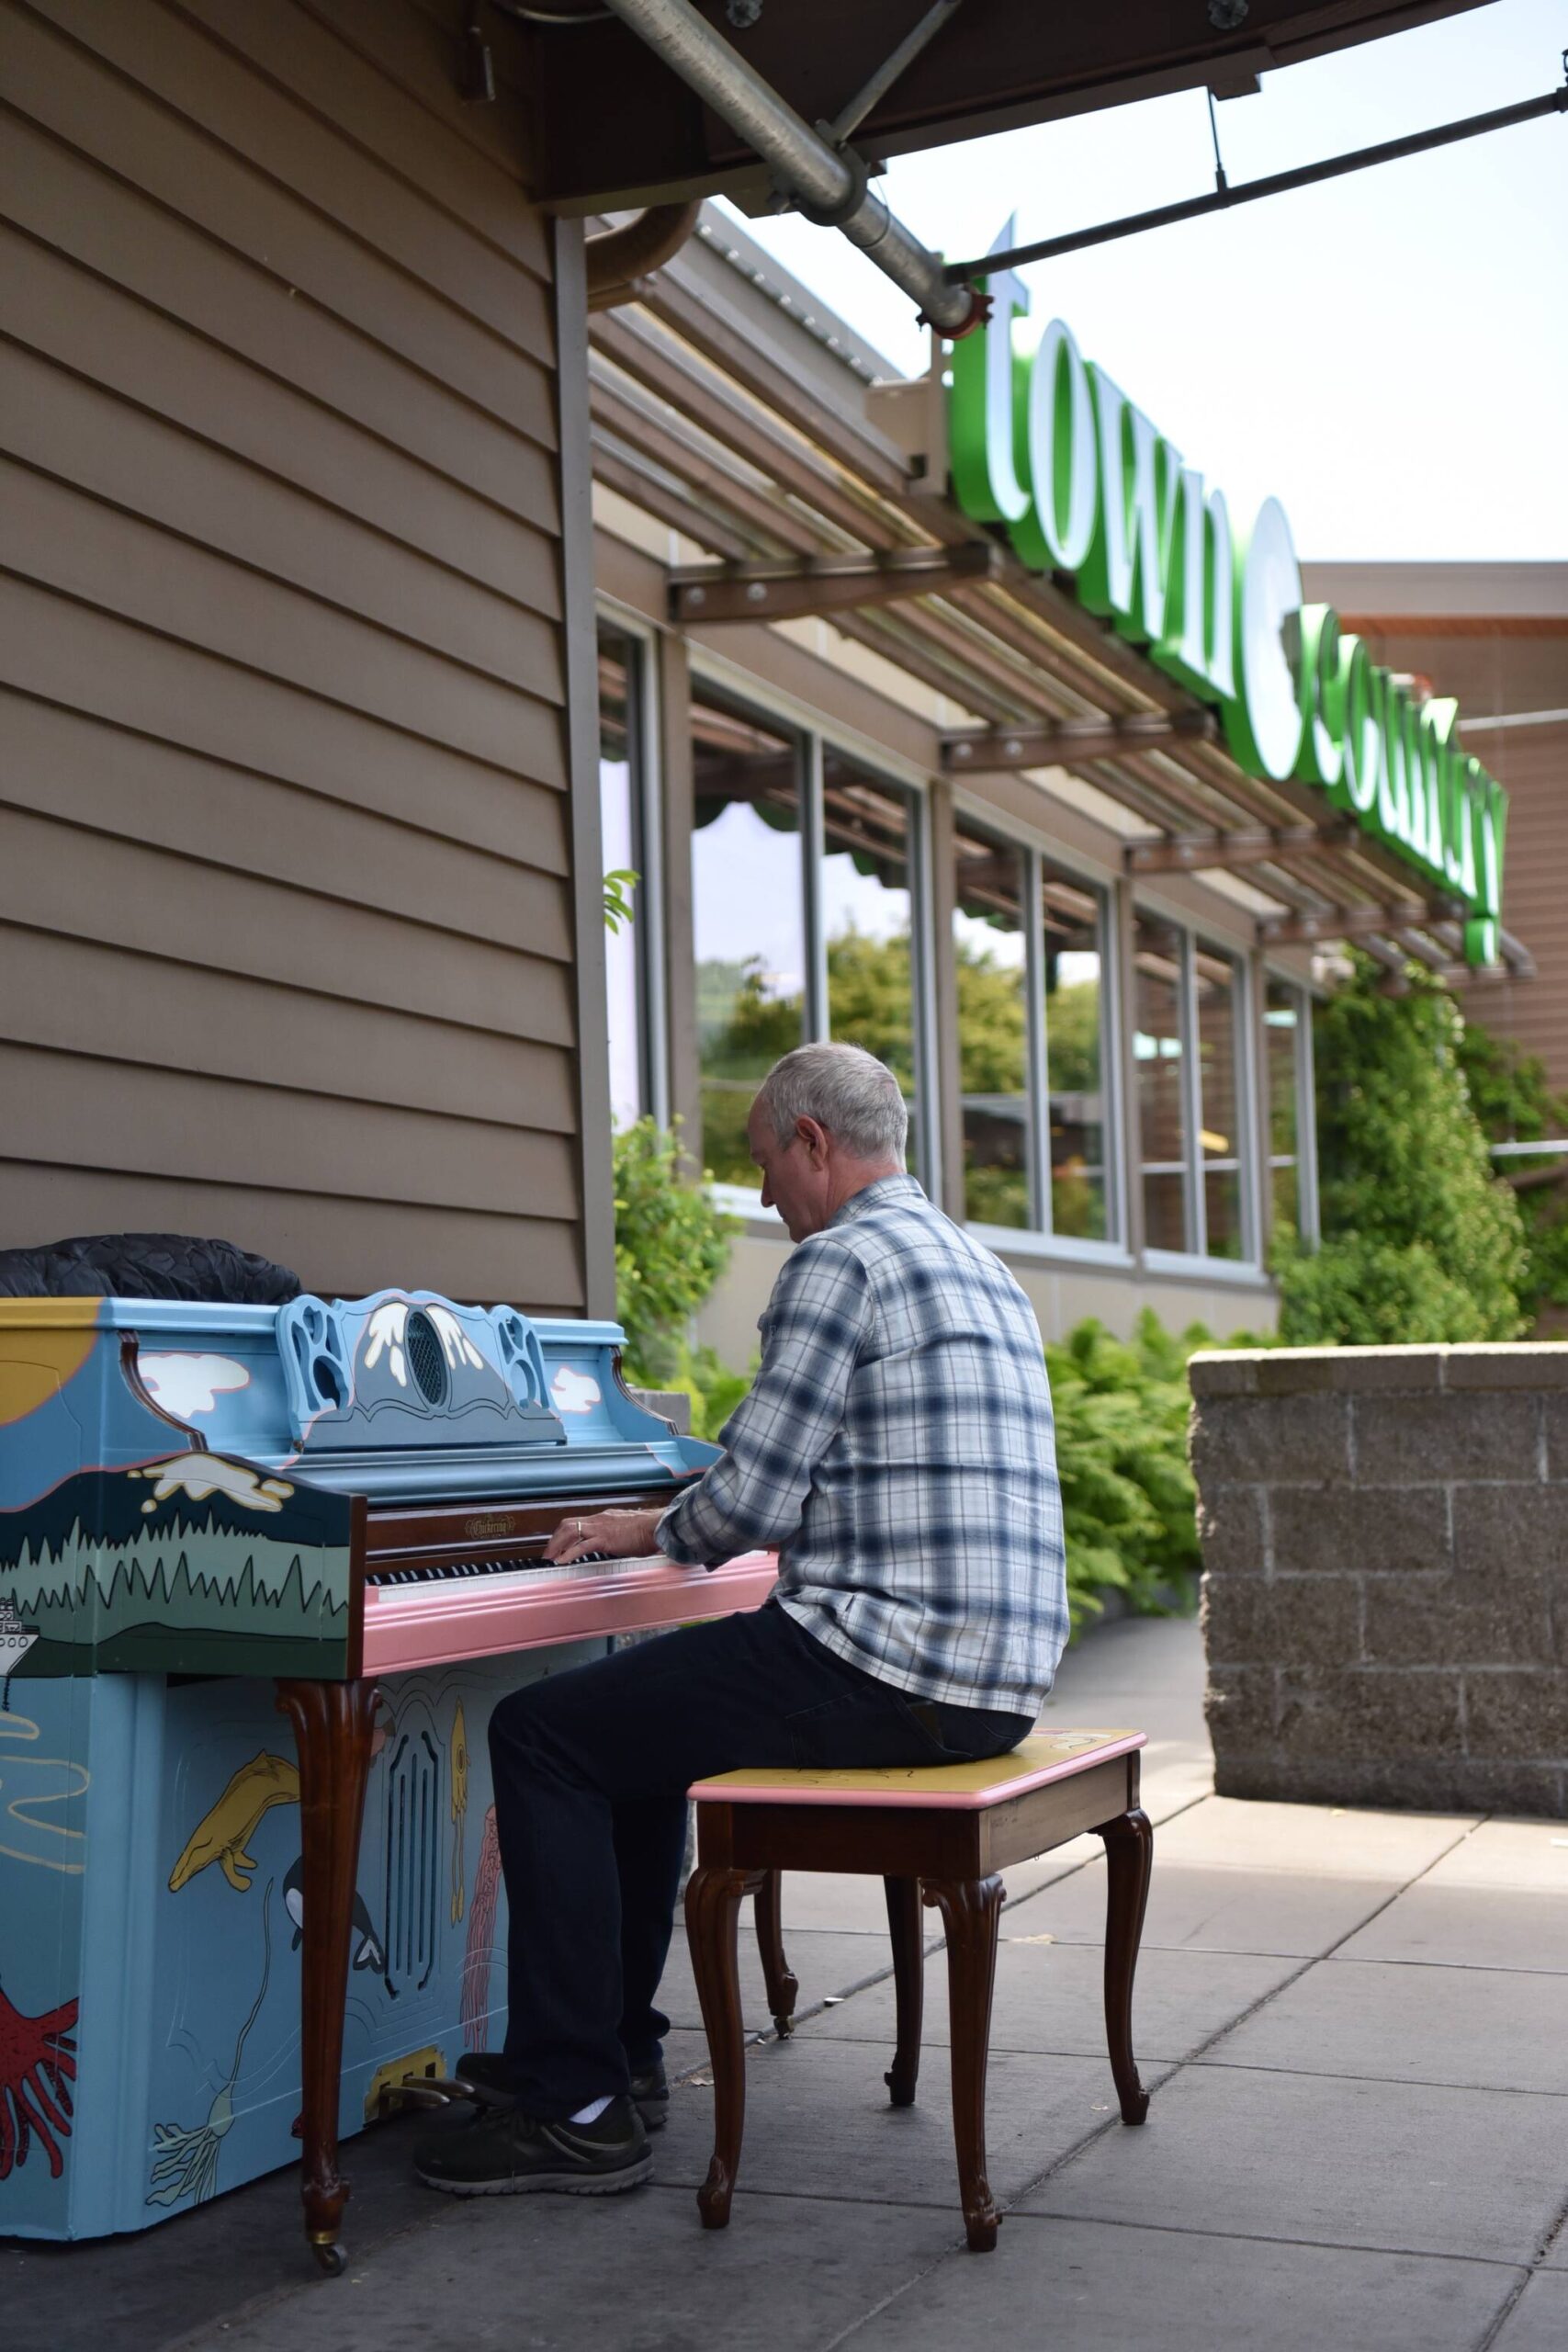 Del Hatch plays the piano in front of Town & Country.